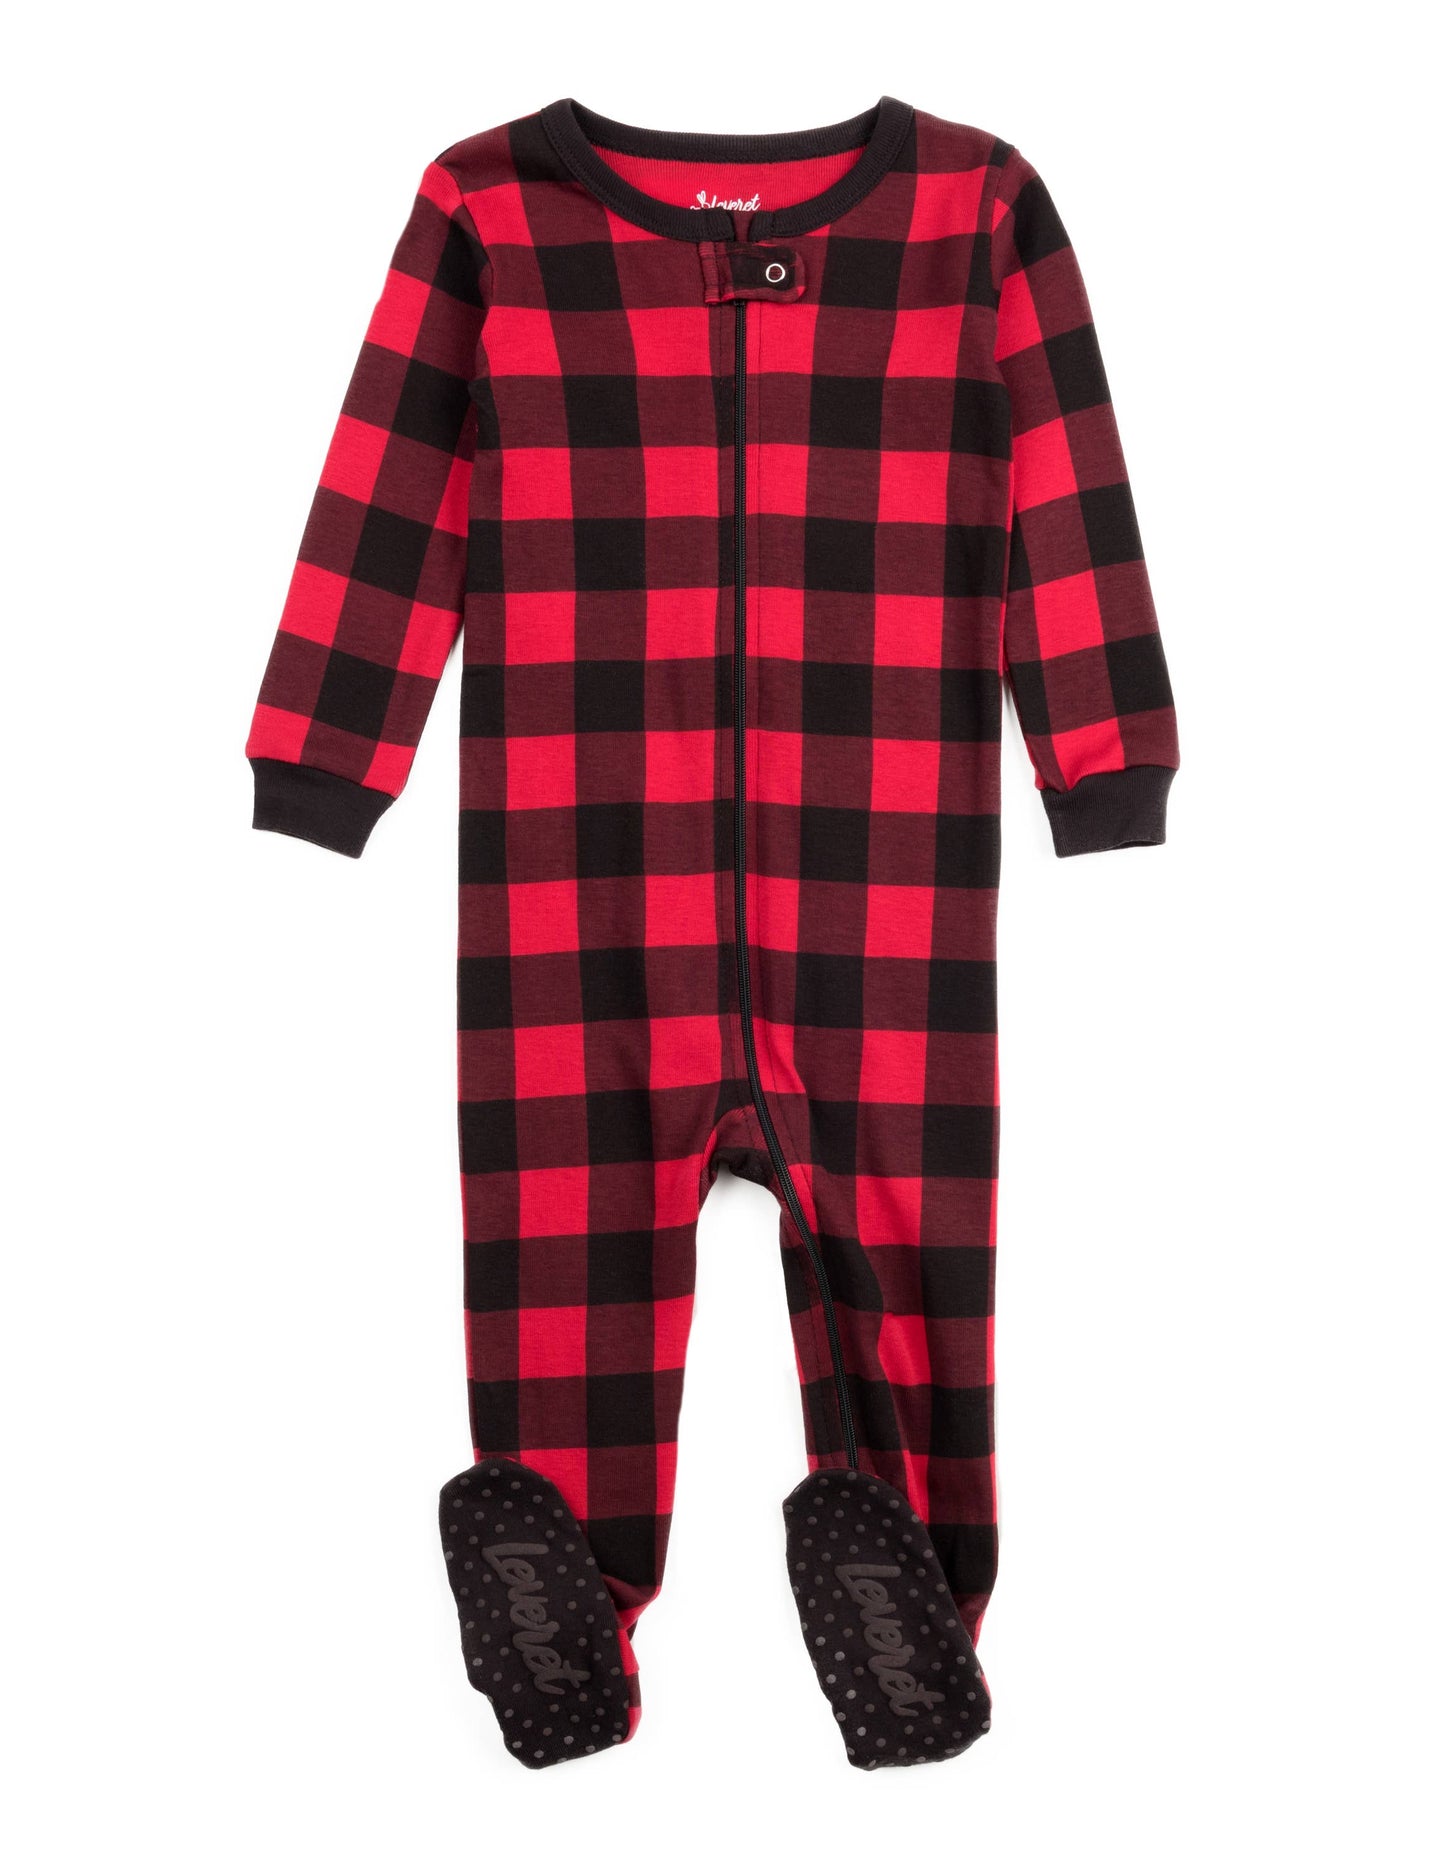 Baby's unisex cotton red check footed pajamas